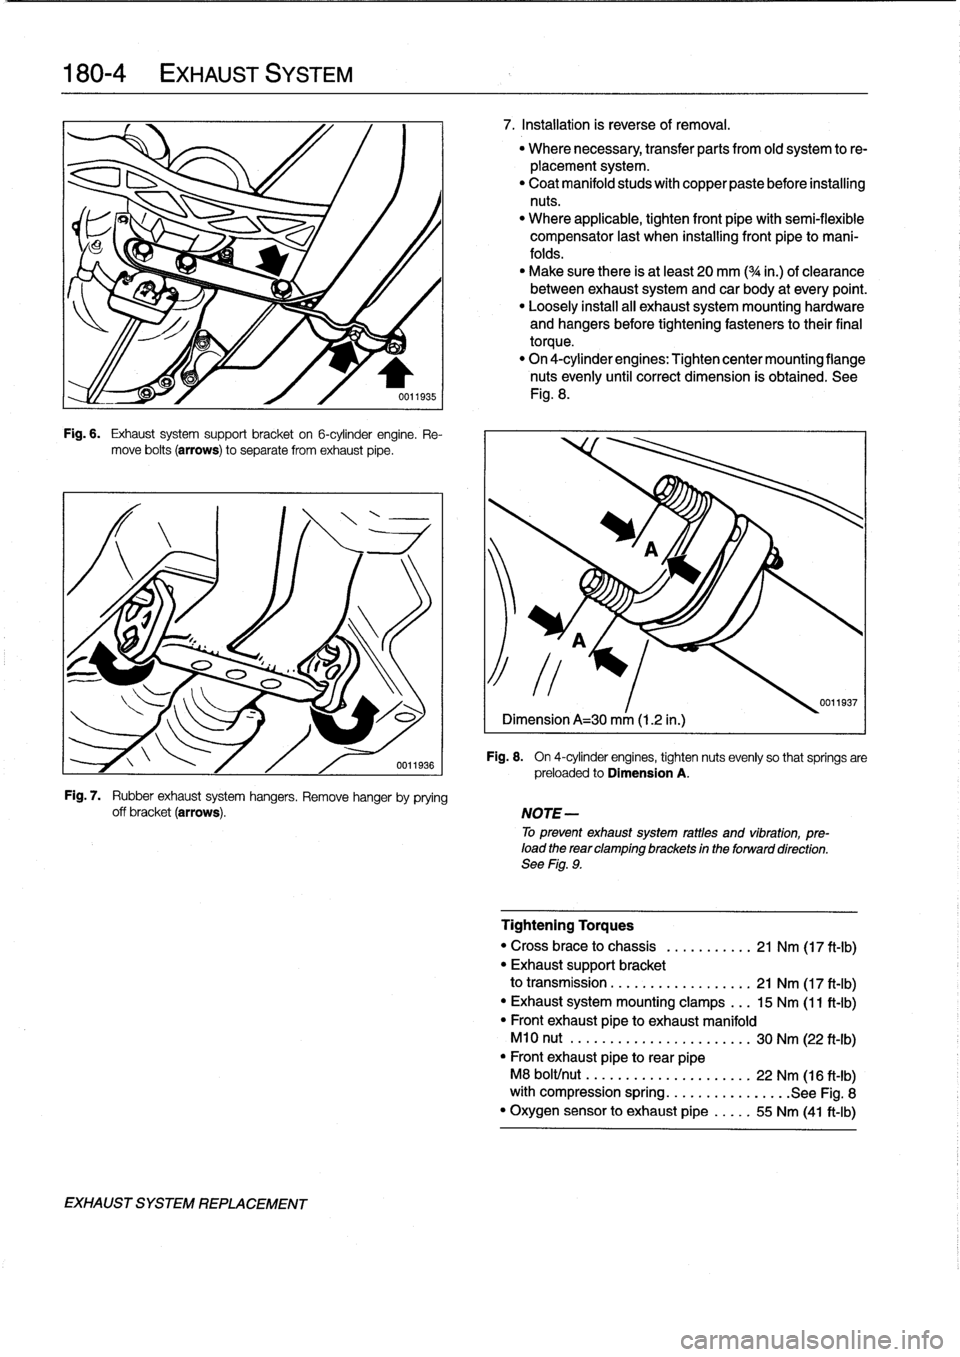 BMW 318i 1994 E36 Owners Guide 
180-
4

	

EXHAUST
SYSTEM

Fig
.
6
.

	

Exhaust
system
support
bracket
on
6-cylinder
engine
.
Re-
move
bolts
(arrows)
to
separate
from
exhaust
pipe
.

Fig
.
7
.

	

Rubber
exhaust
system
hangers
.
R